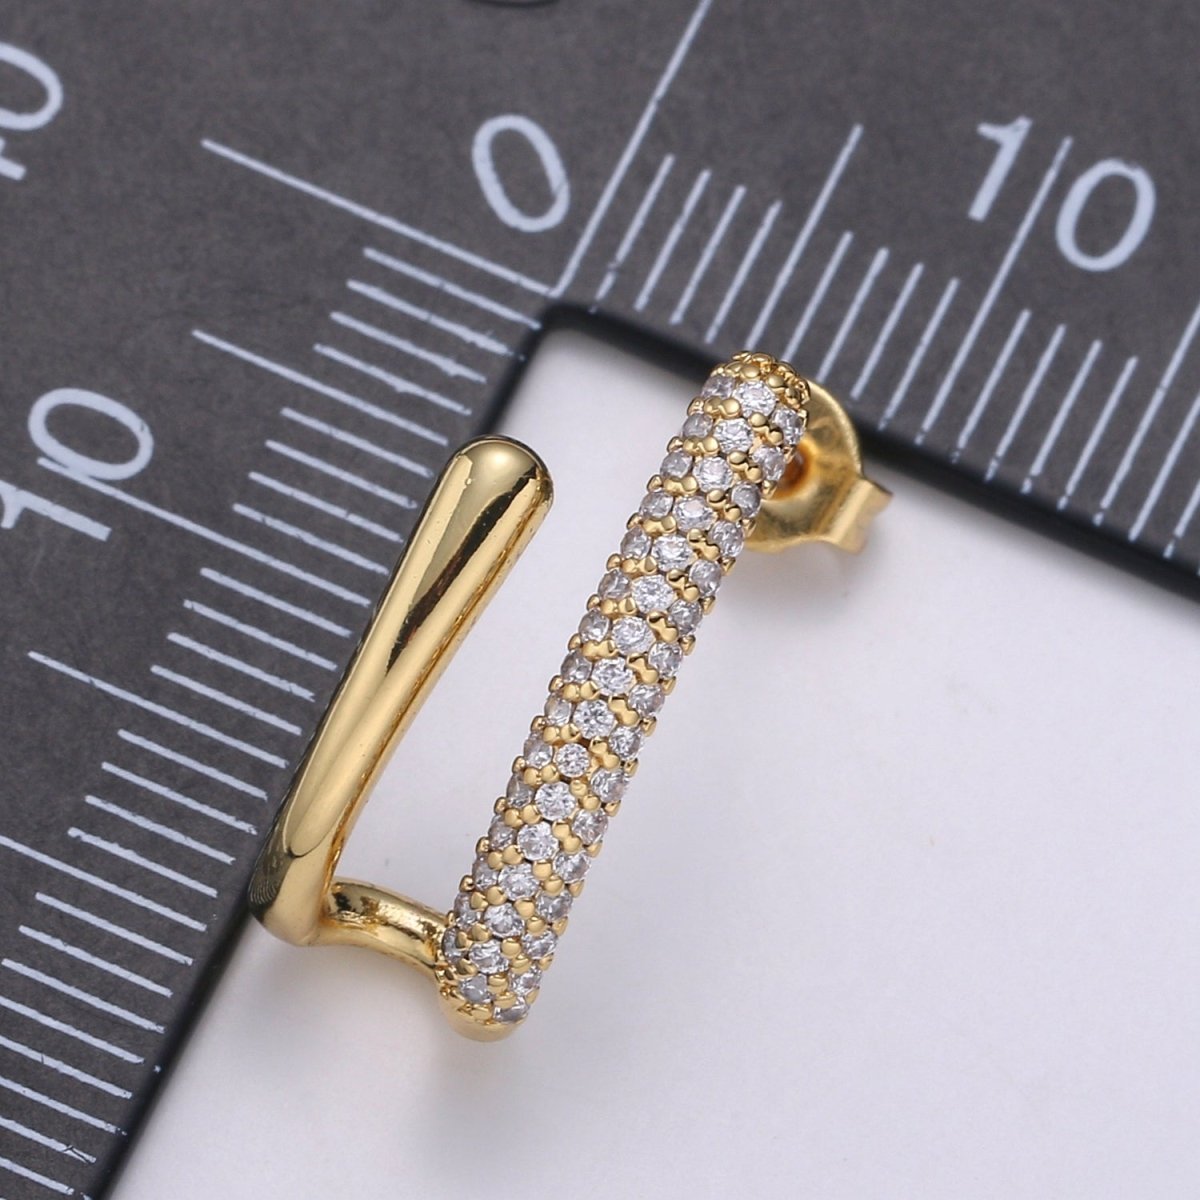 U Shape 24K Gold filled CZ Pave Stud, White Gold filled Micro Pave Earring for DIY Earring Craft Supply Jewelry Making, EARR-1367, 1368 Q-389 Q-390 - DLUXCA